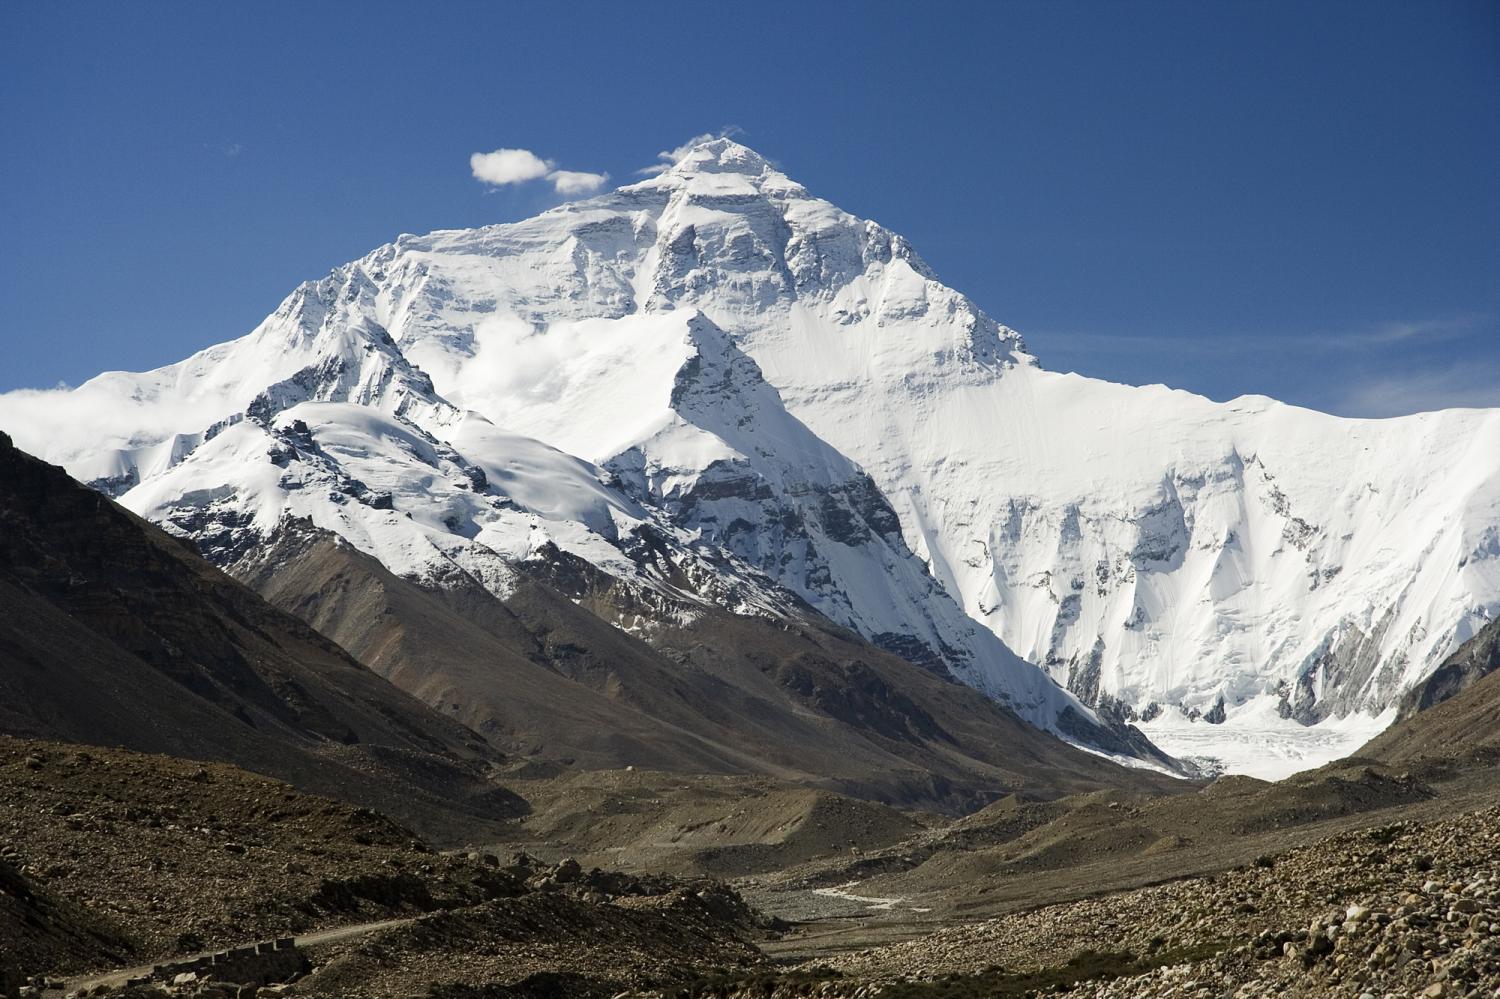 Global warming poses grave threat to the Himalayas